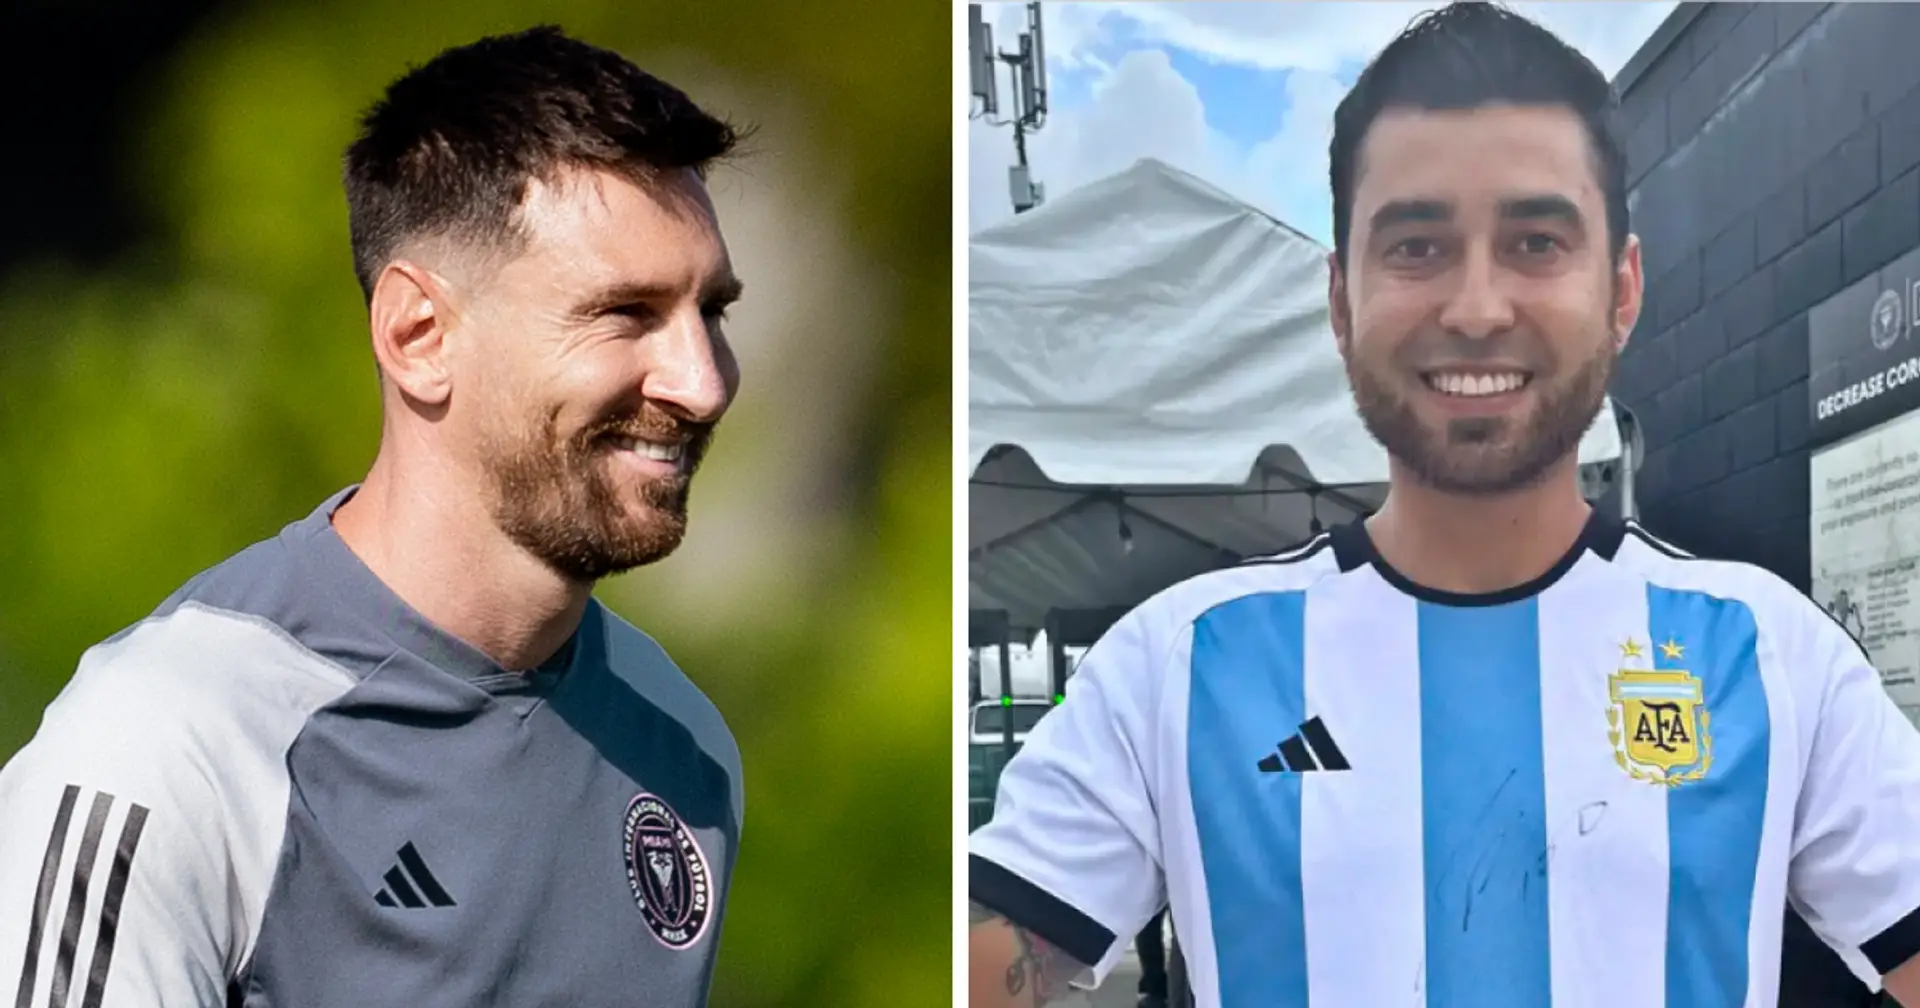 'They took me out and fired me': cleaner was fired after asking for Lionel Messi's autograph